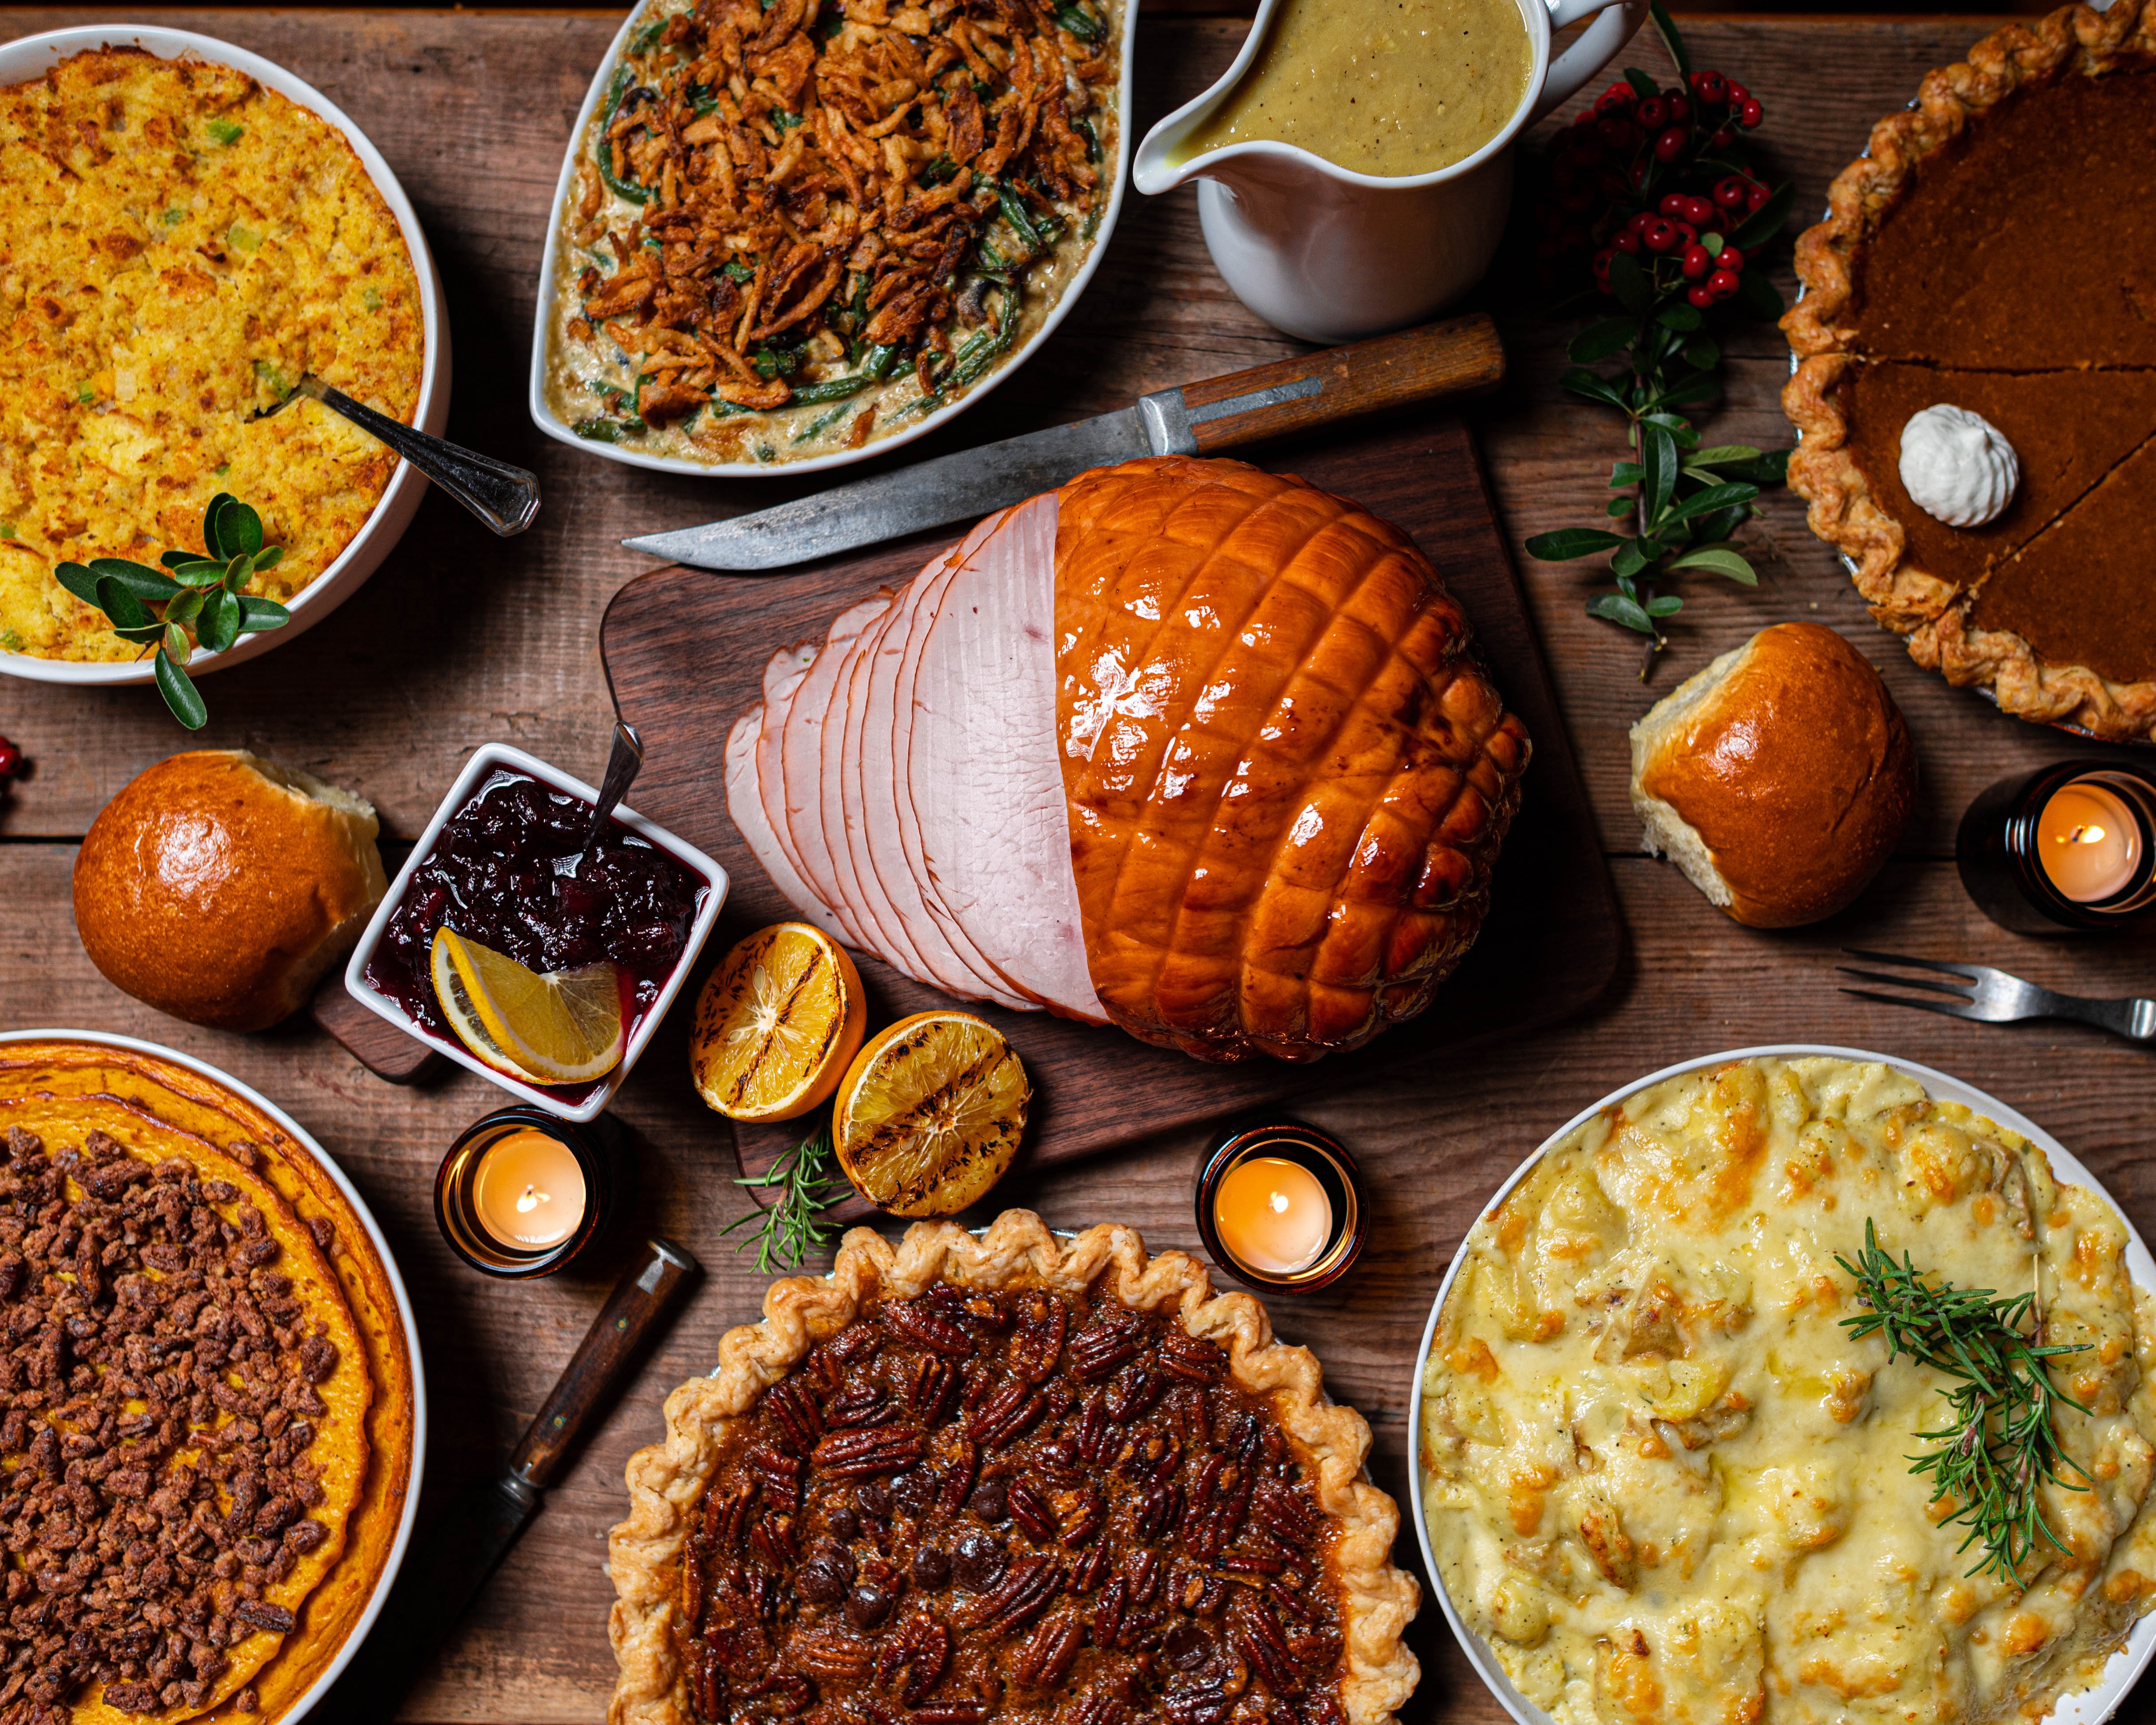 Display of traditional thanksgiving foods including pecan pie, ham, and stuffing